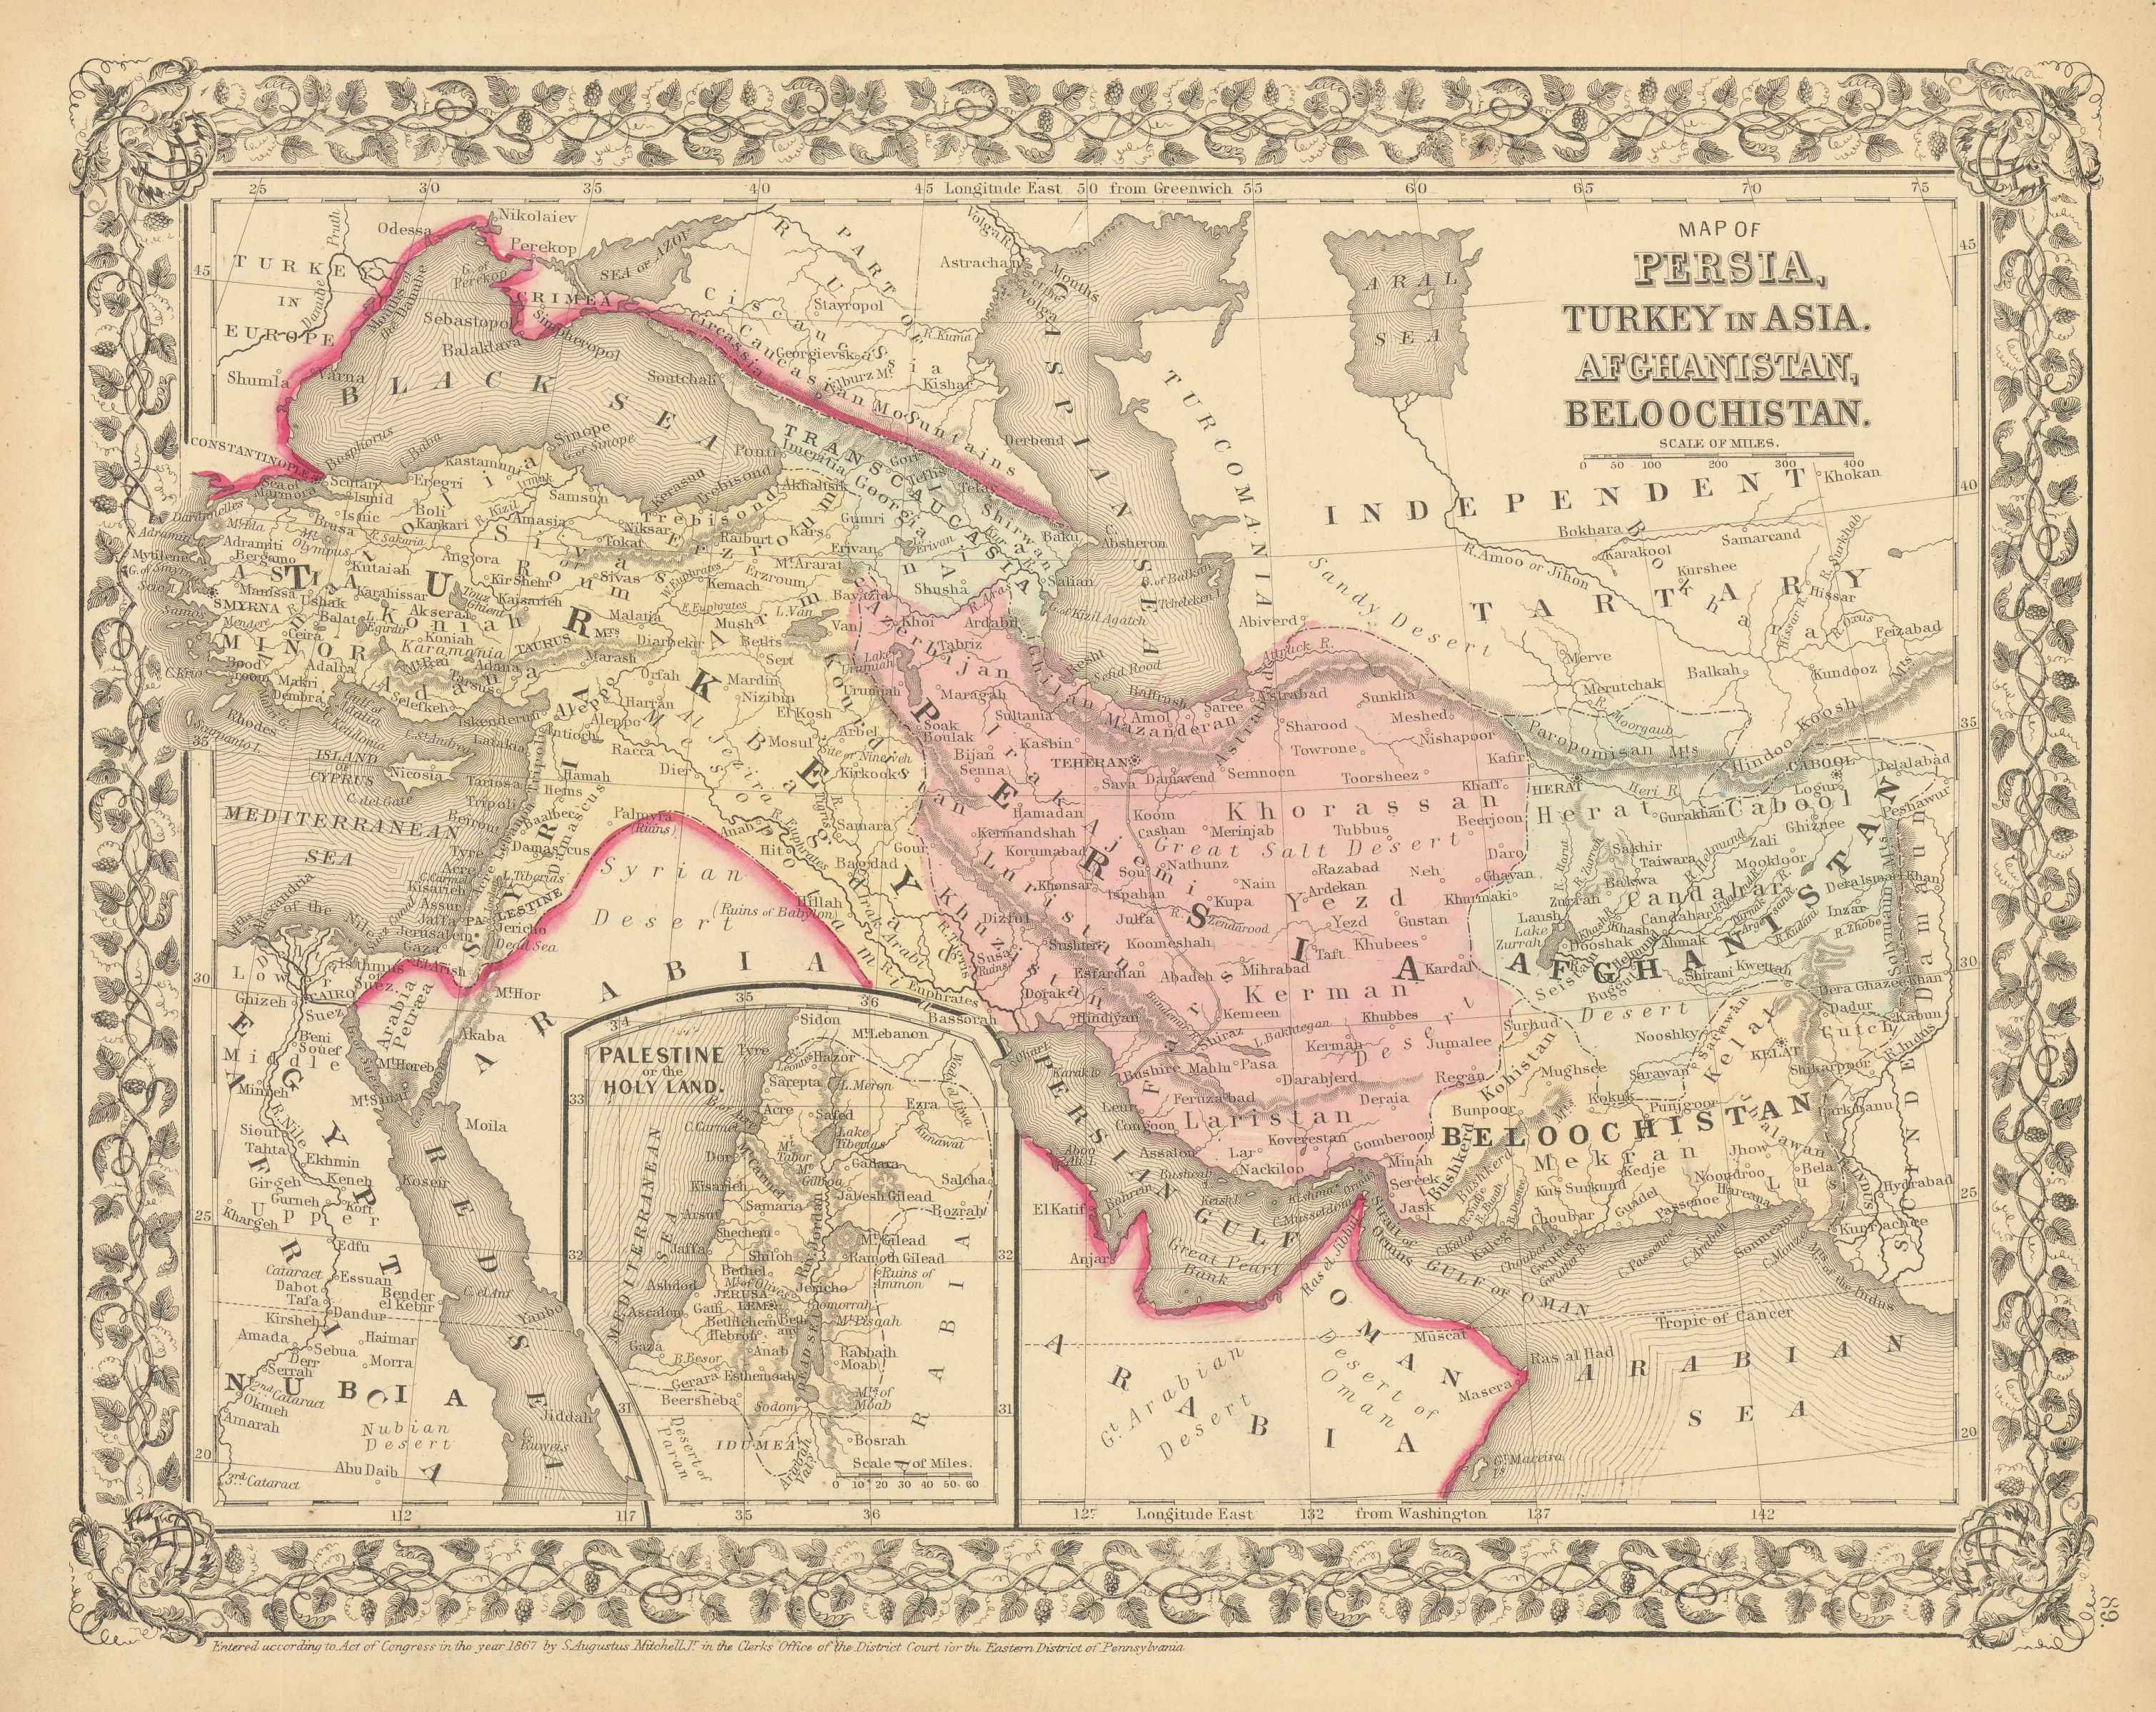 Map of Persia, Turkey in Asia, Afghanistan, Beloochistan. MITCHELL 1869